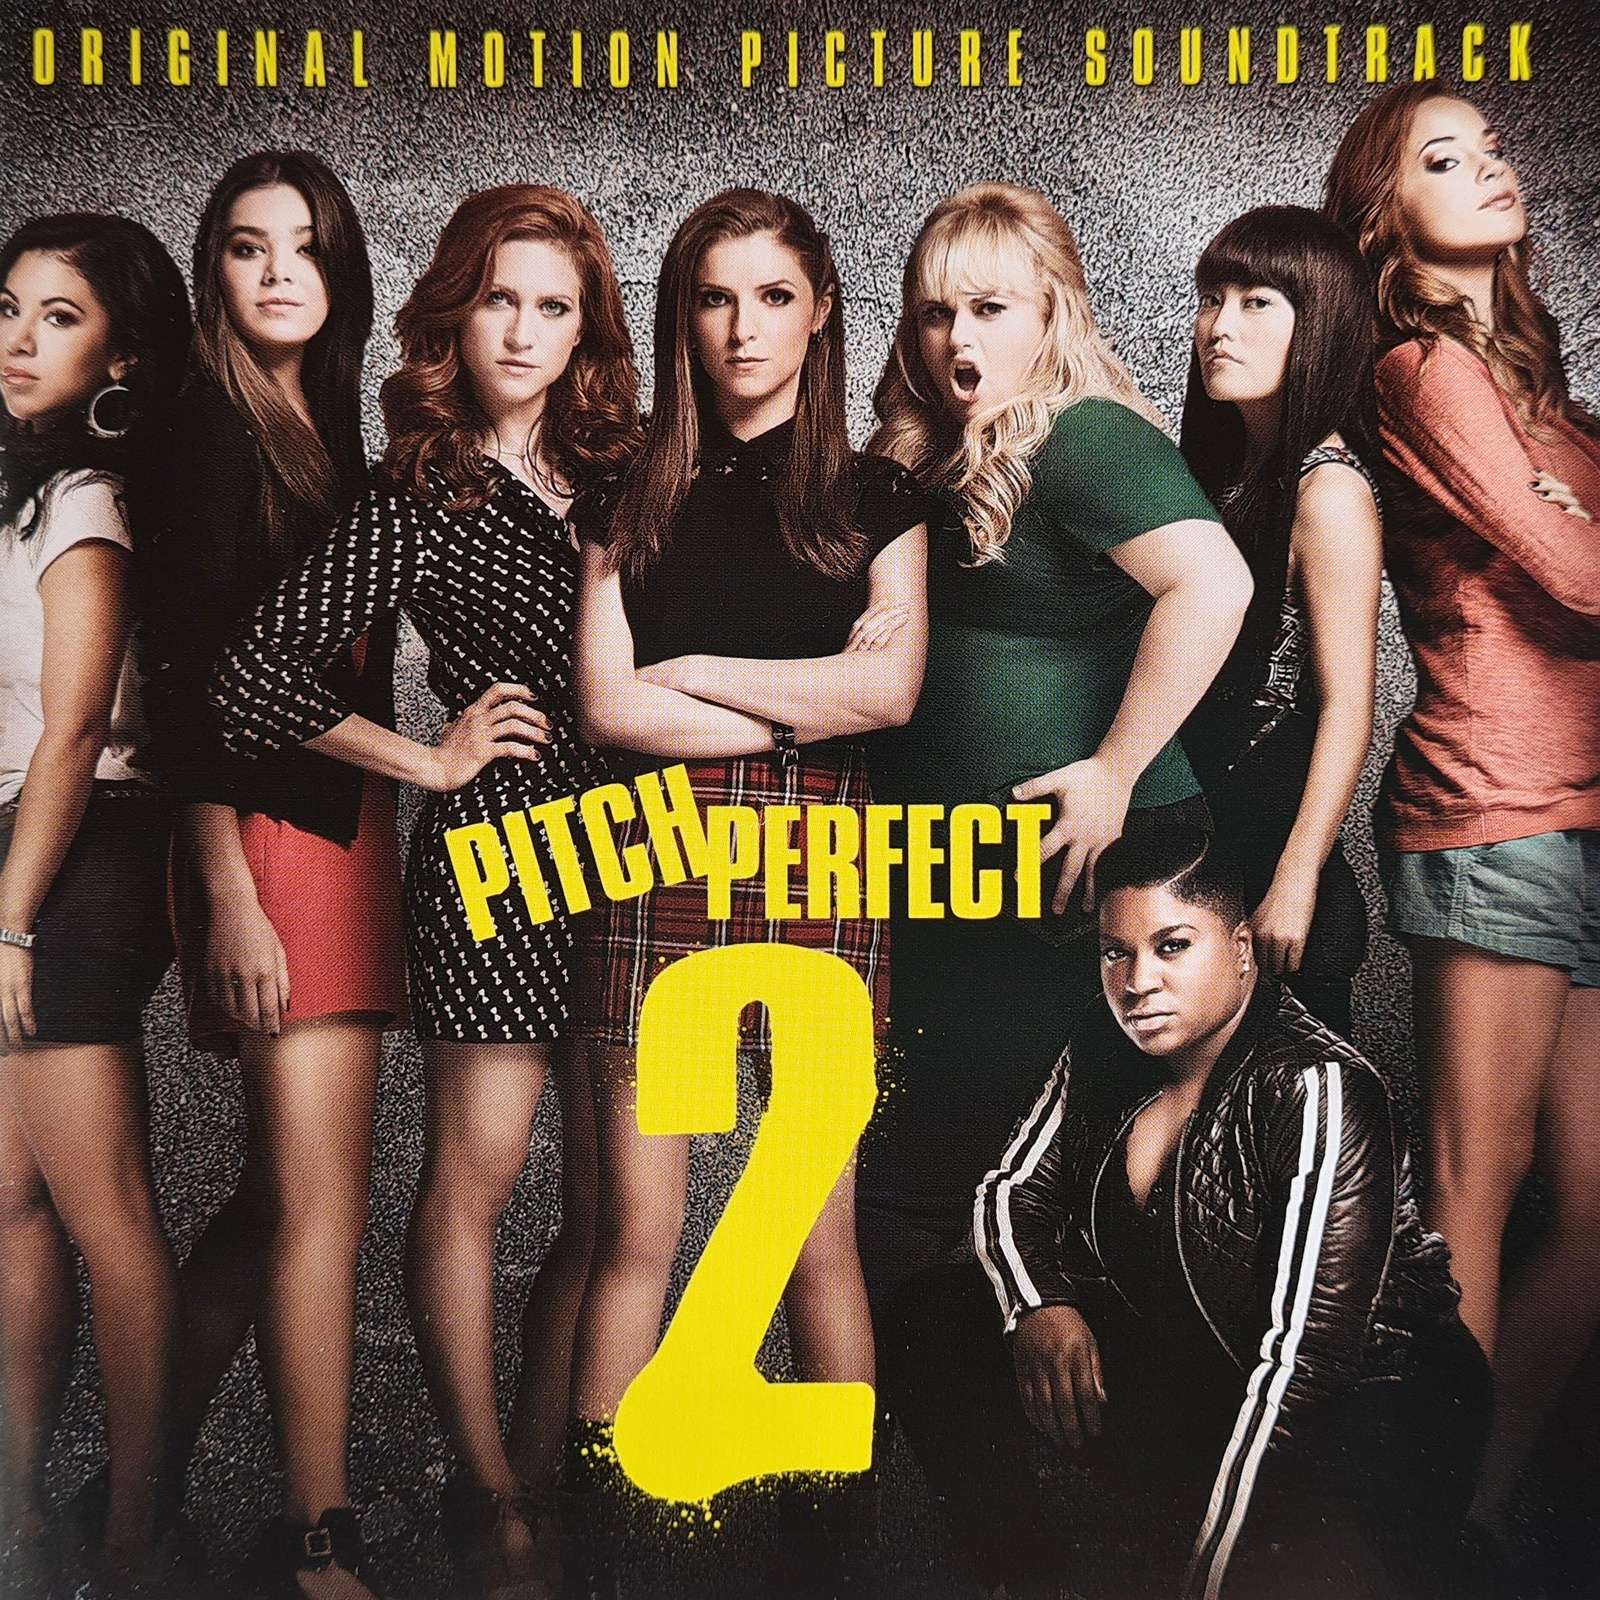 Pitch Perfect 2 - Original Motion Picture Soundtrack (CD)